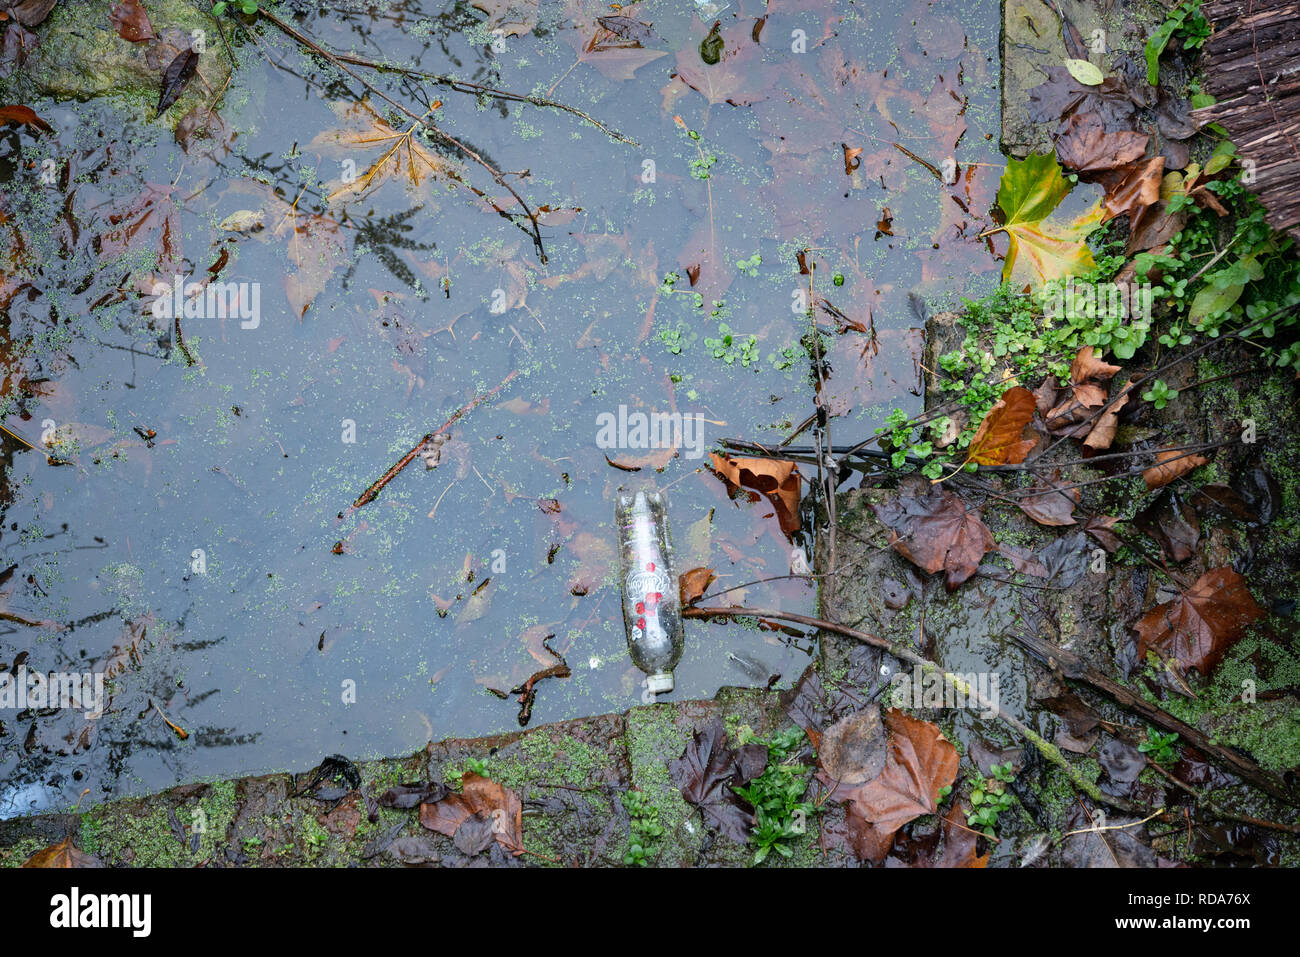 Discarded rubbish found along the River Lea in London, UK Stock Photo